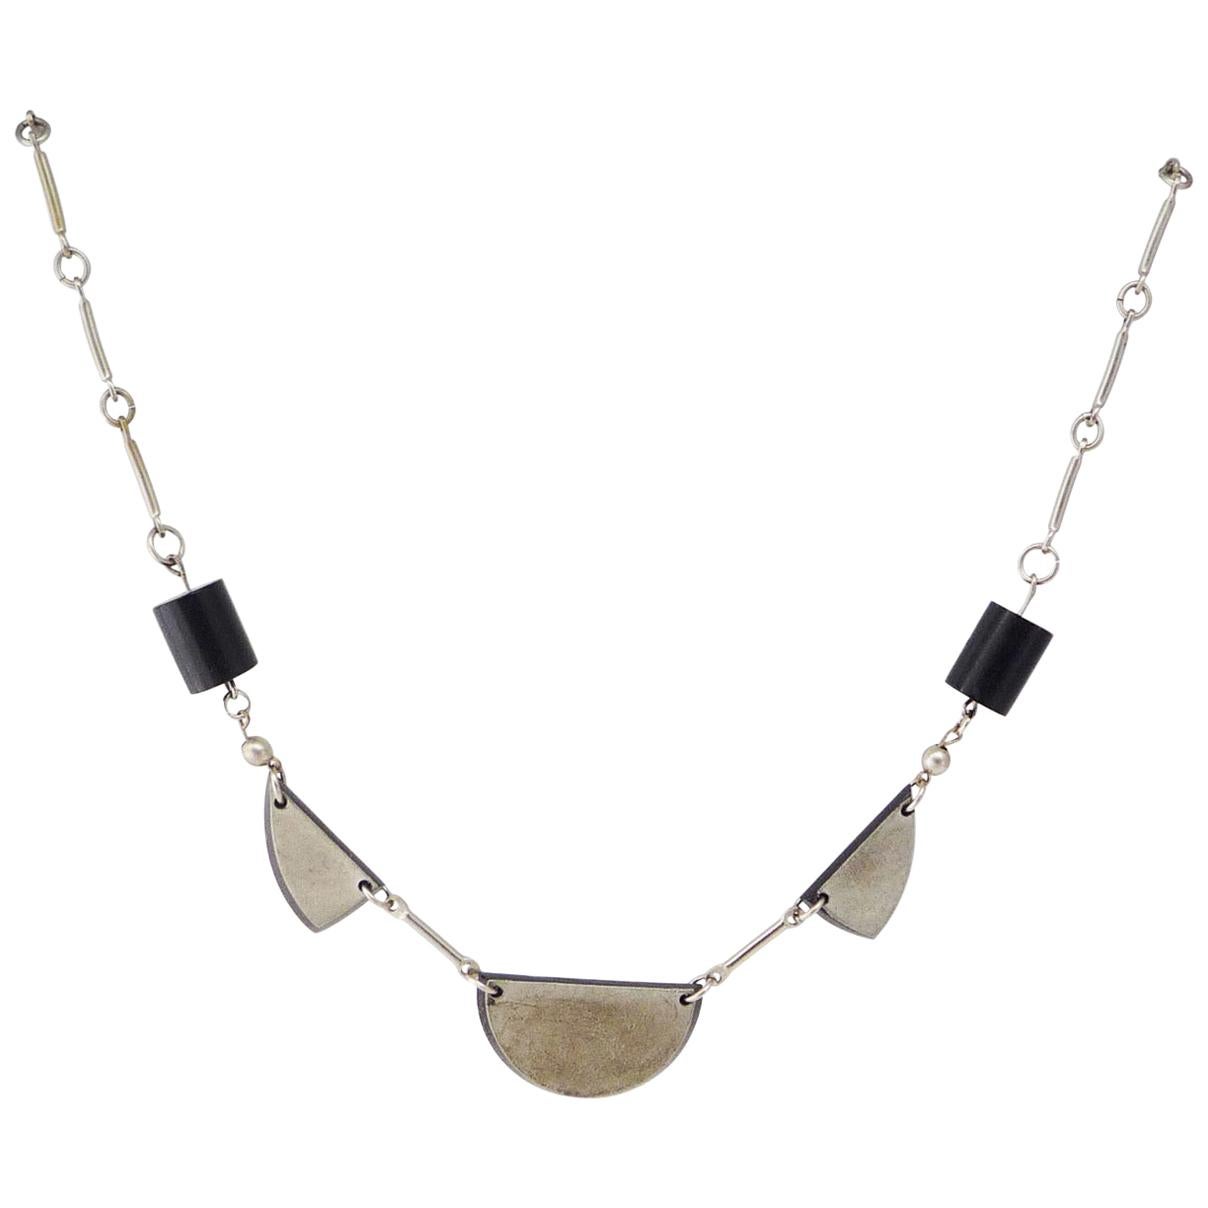 Collier in Chrome and Galalith by Jakob Bengel, around 1920/30